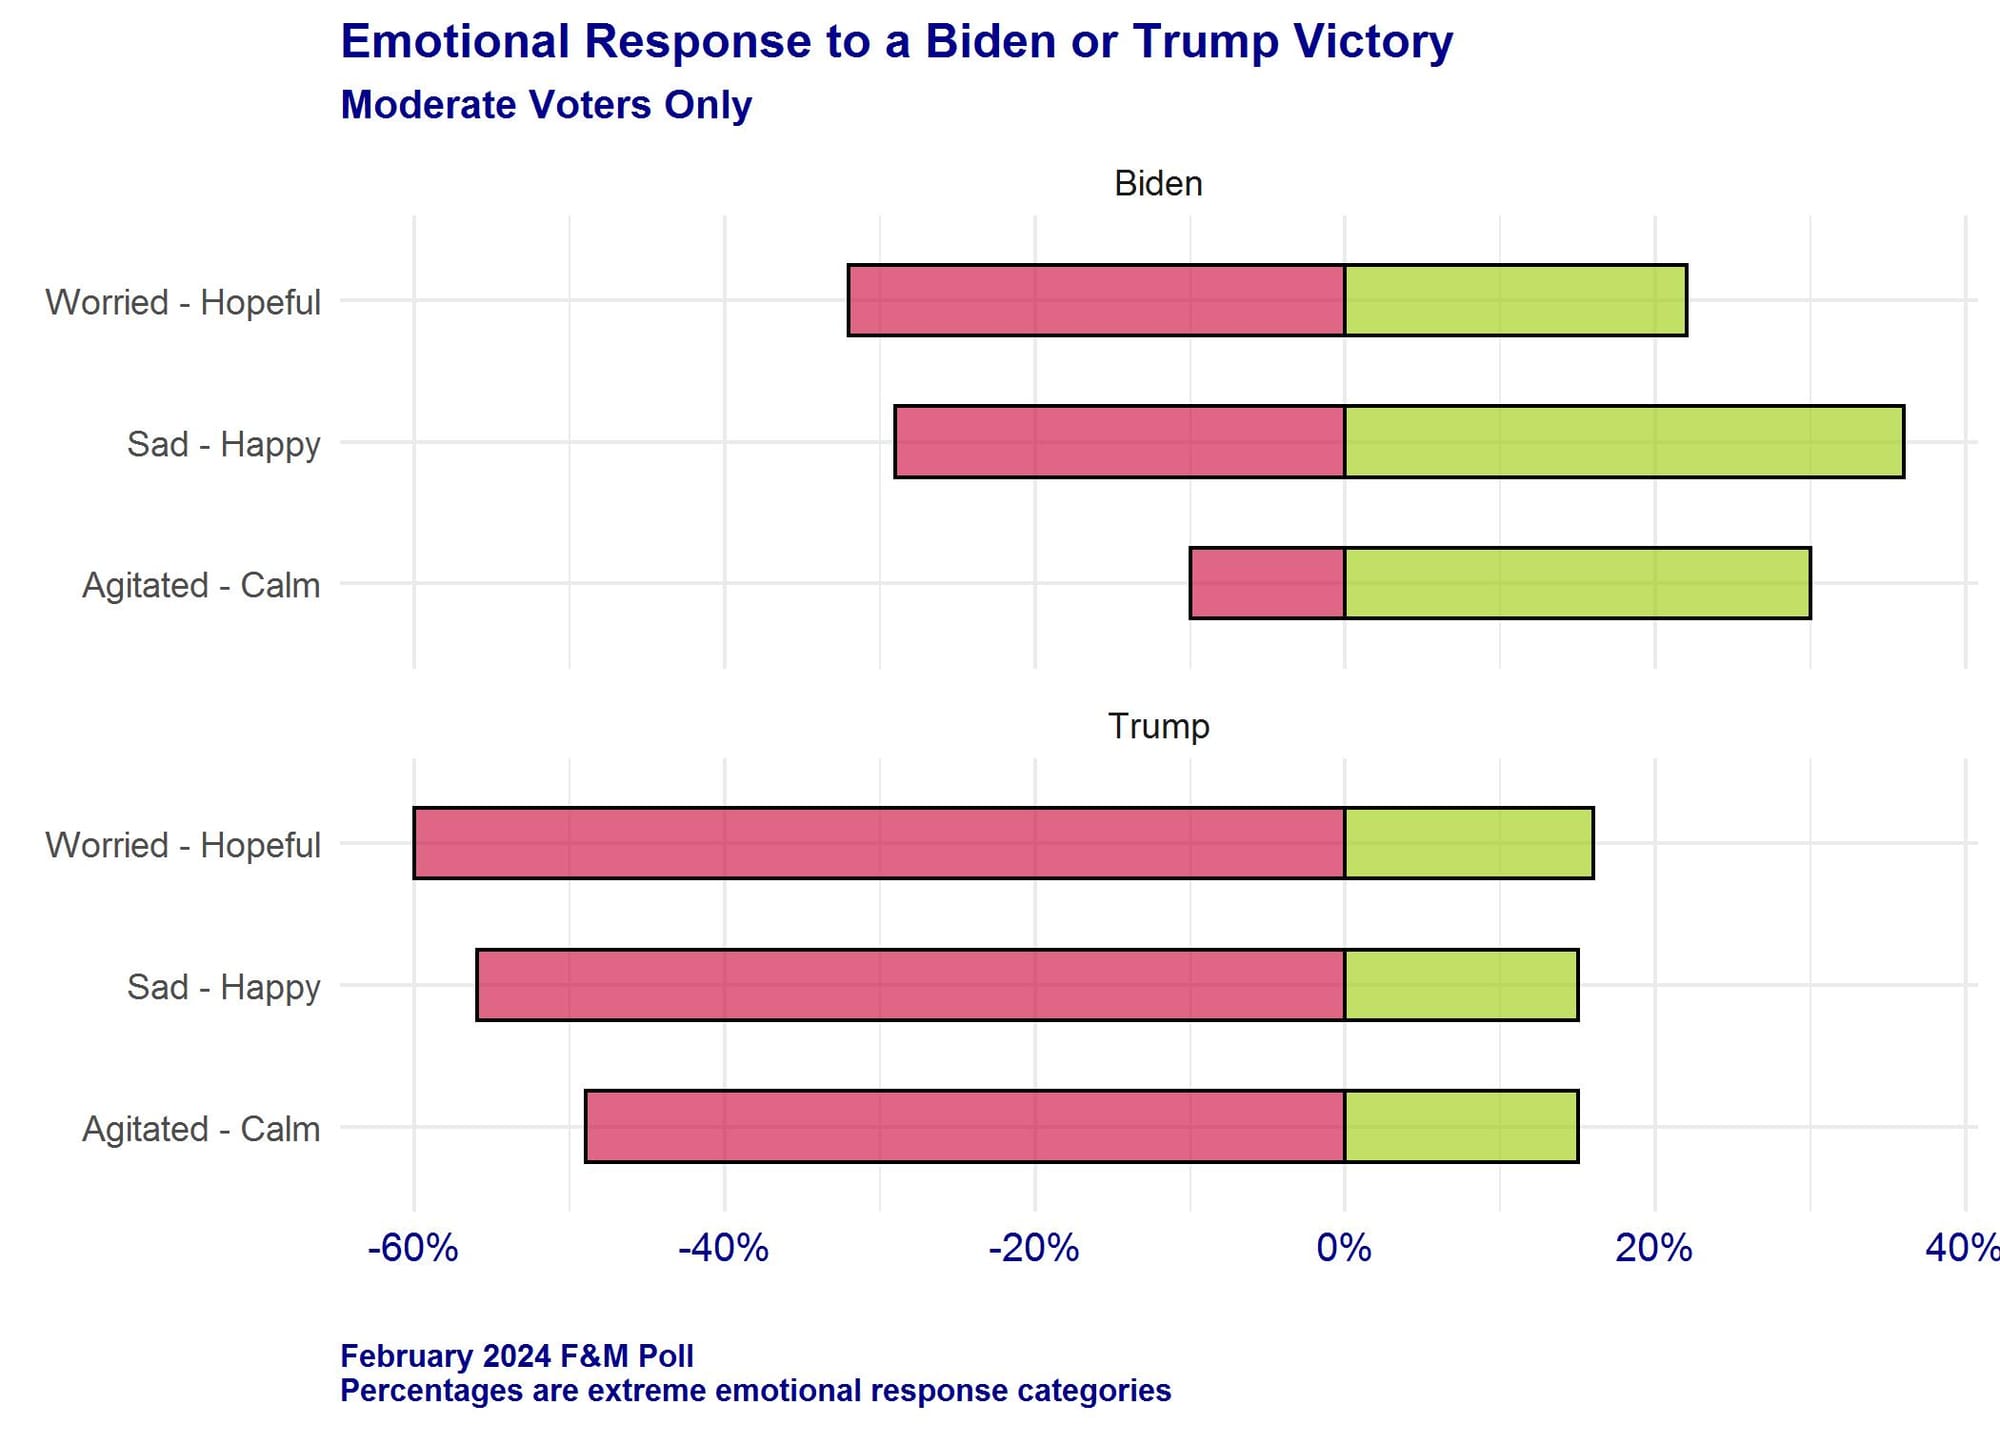 Figure 2. Bar graph showing February 2024 F&M Poll data on moderate voters' emotional responses to a Biden or Trump victory. Response categories are happy-sad, worried-hopeful, and agitated-calm.